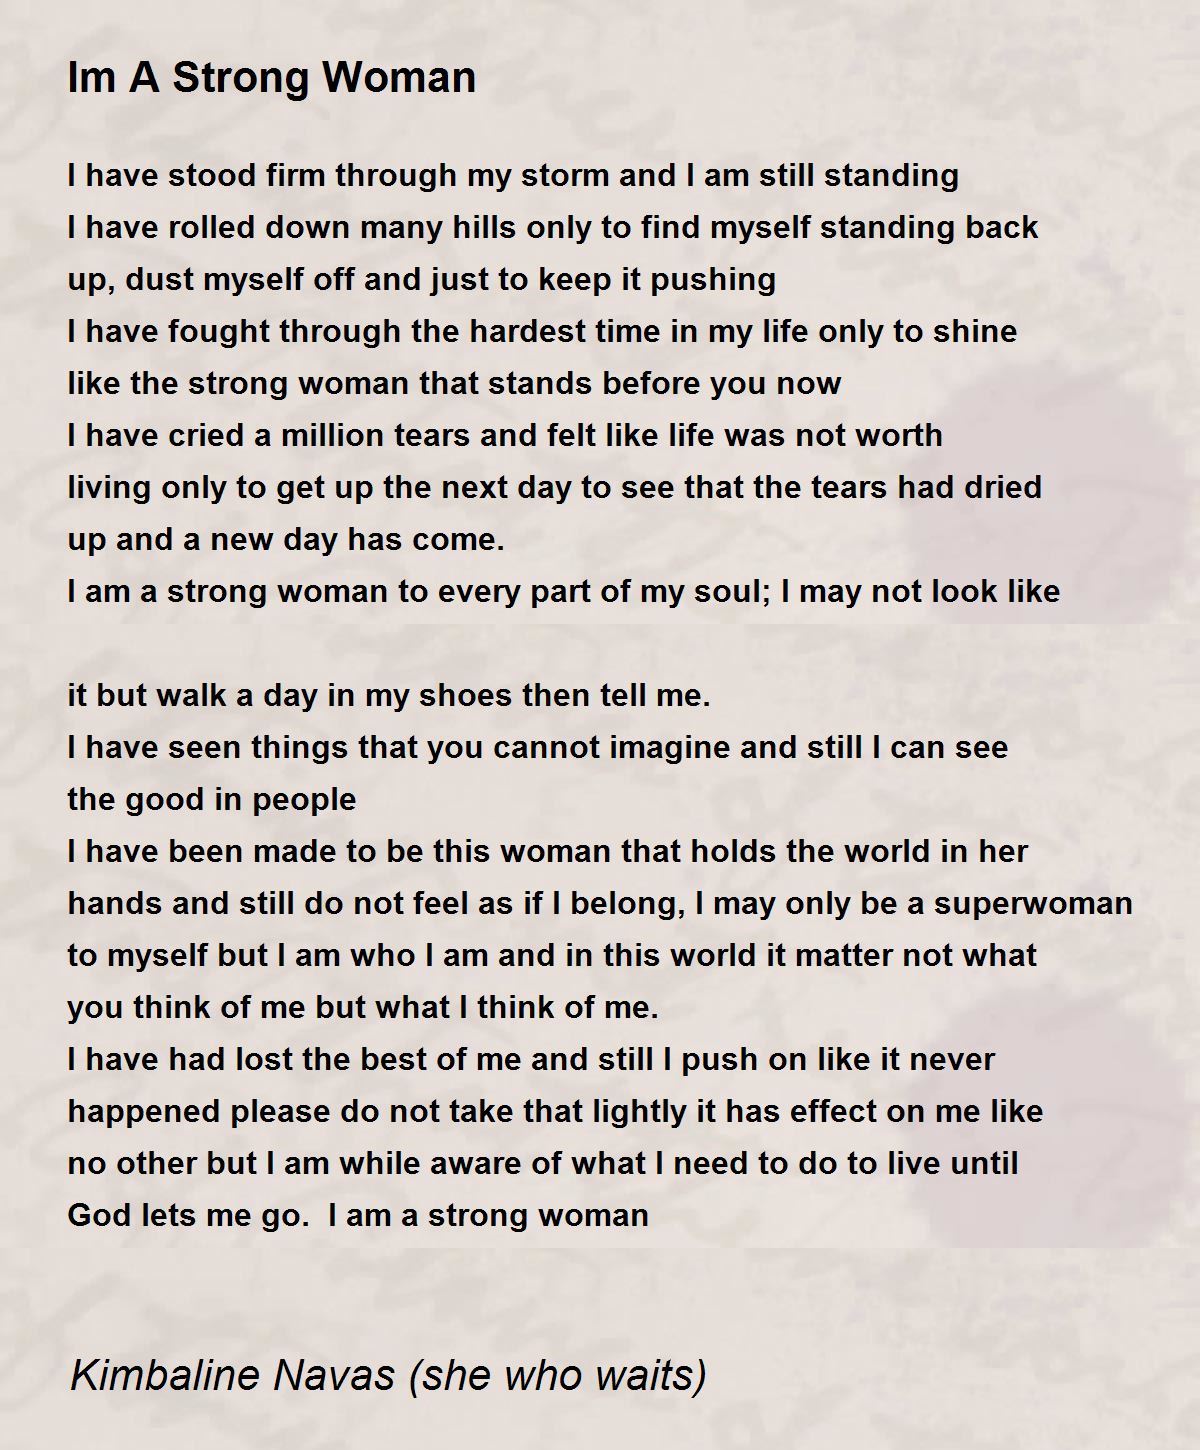 https://img.poemhunter.com/i/poem_images/651/im-a-strong-woman.jpg